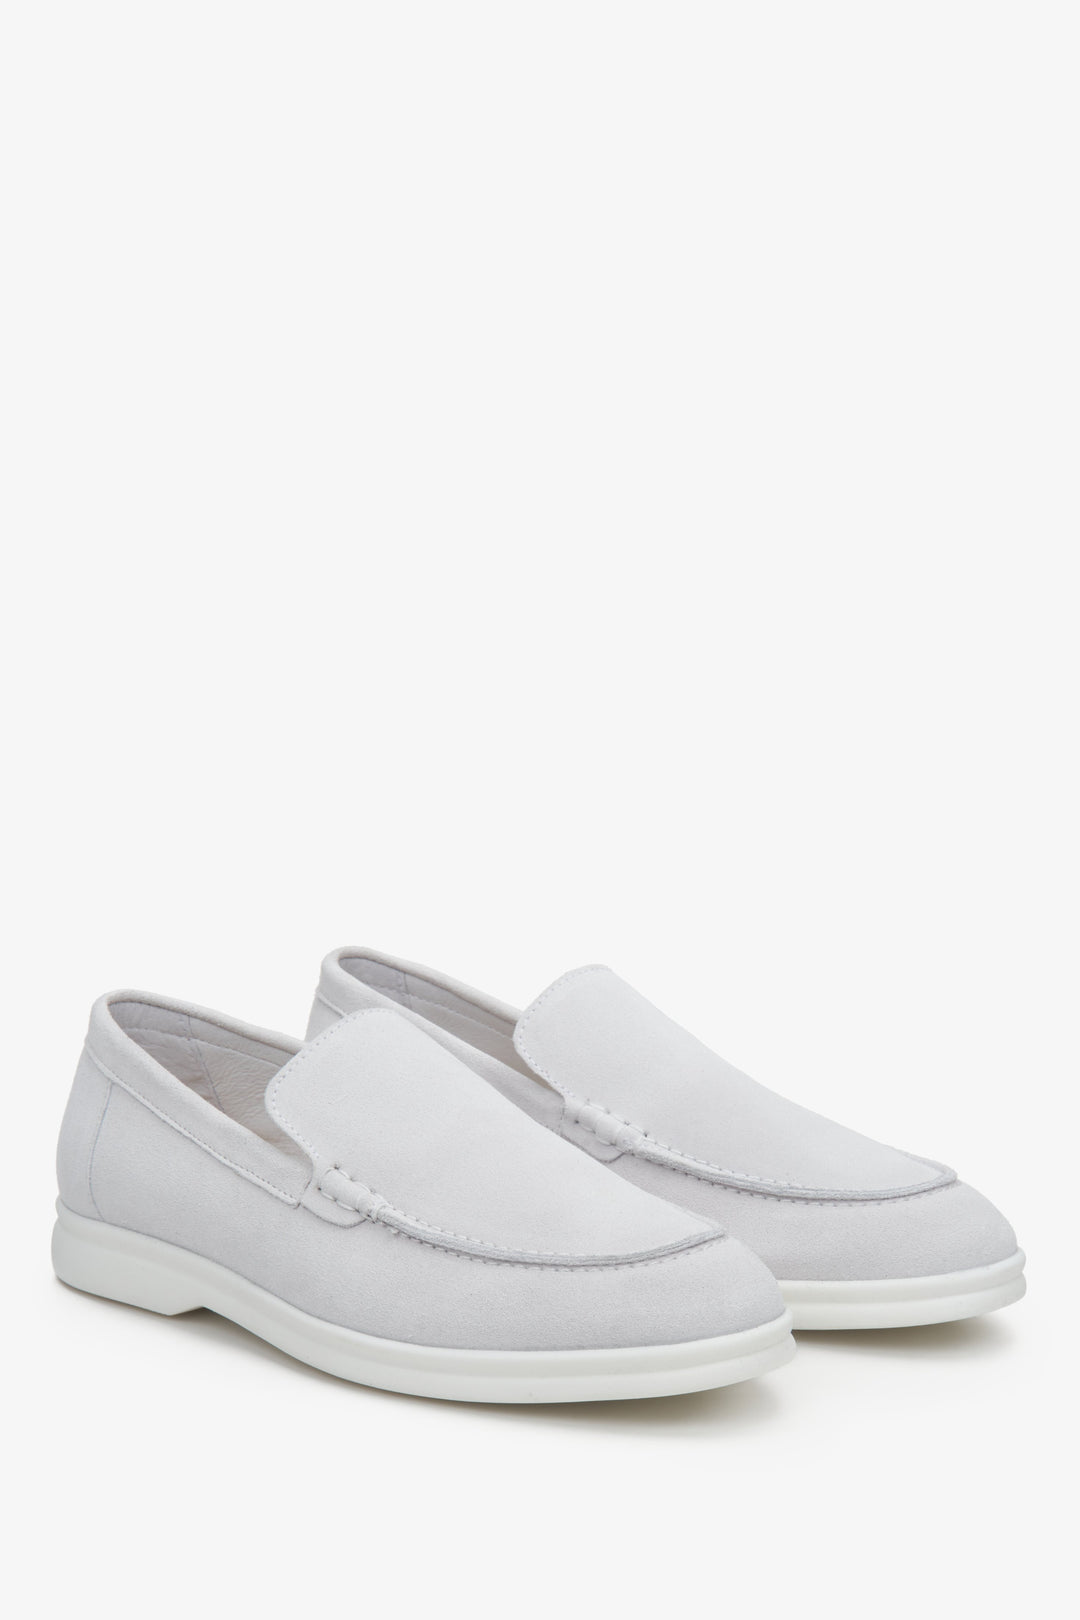 Women's suede loafers in light grey Estro - presentation of the sideline and white sole.